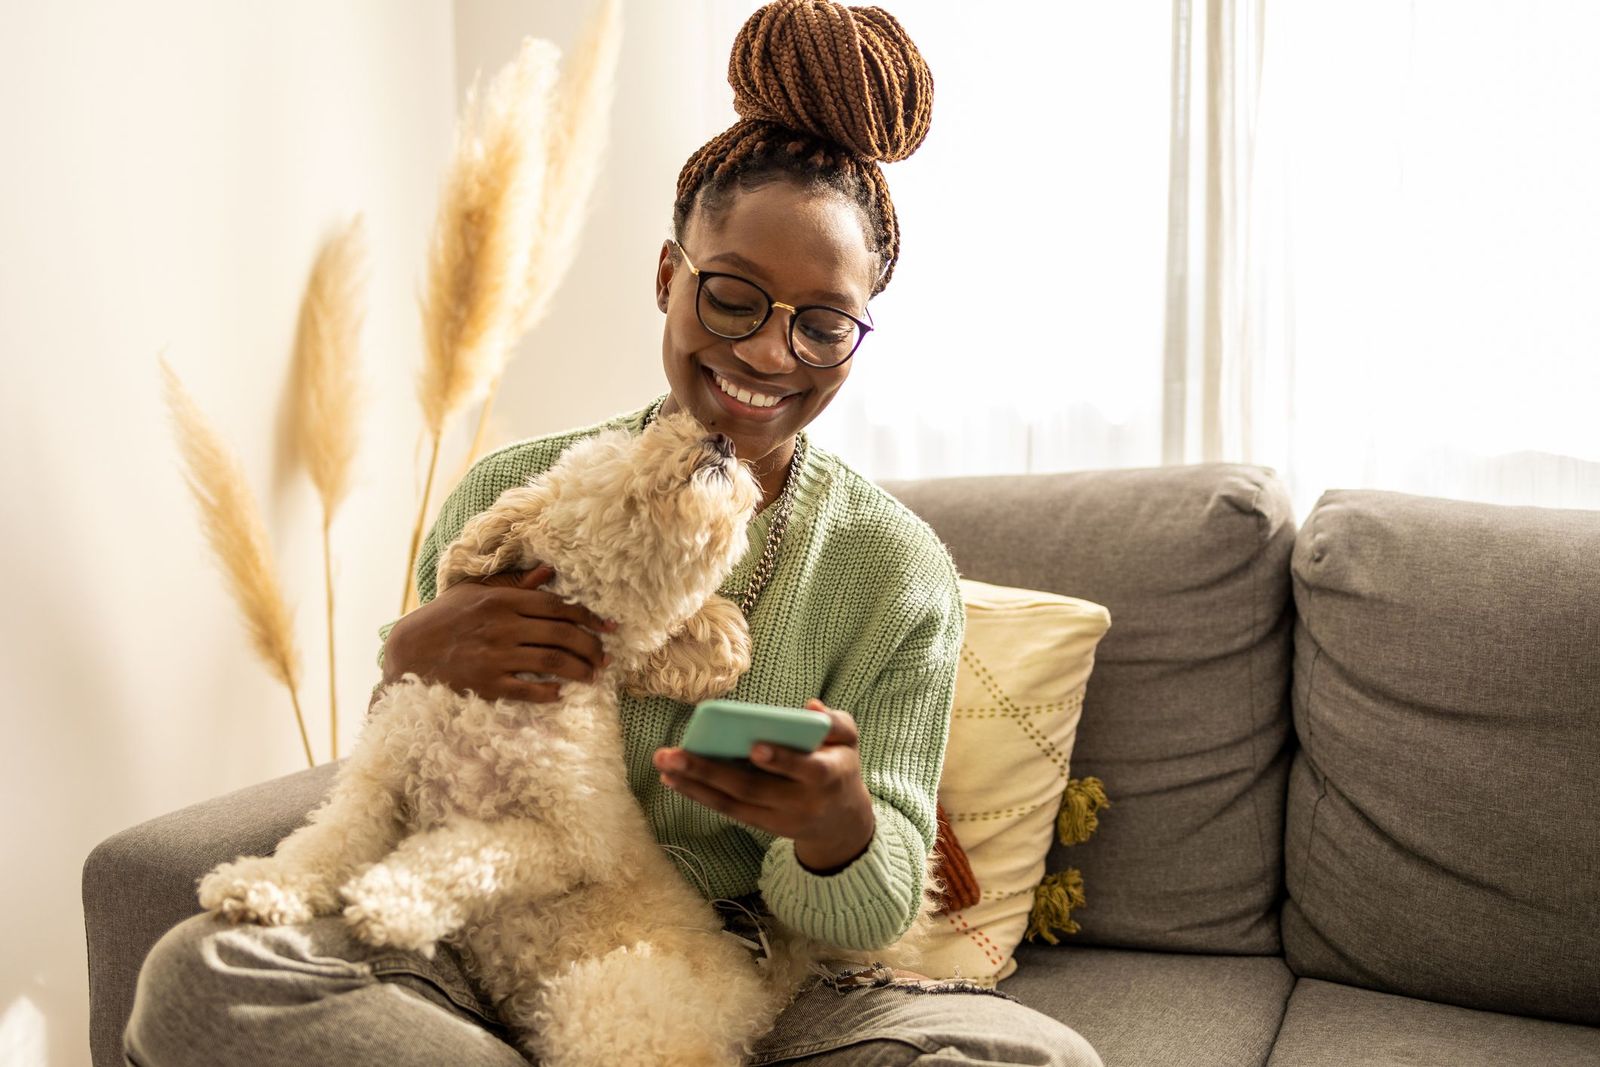 Providing a great virtual care experience - Small poodle mix dog licks owners face while sitting on the couch. Owner looks at her phone.